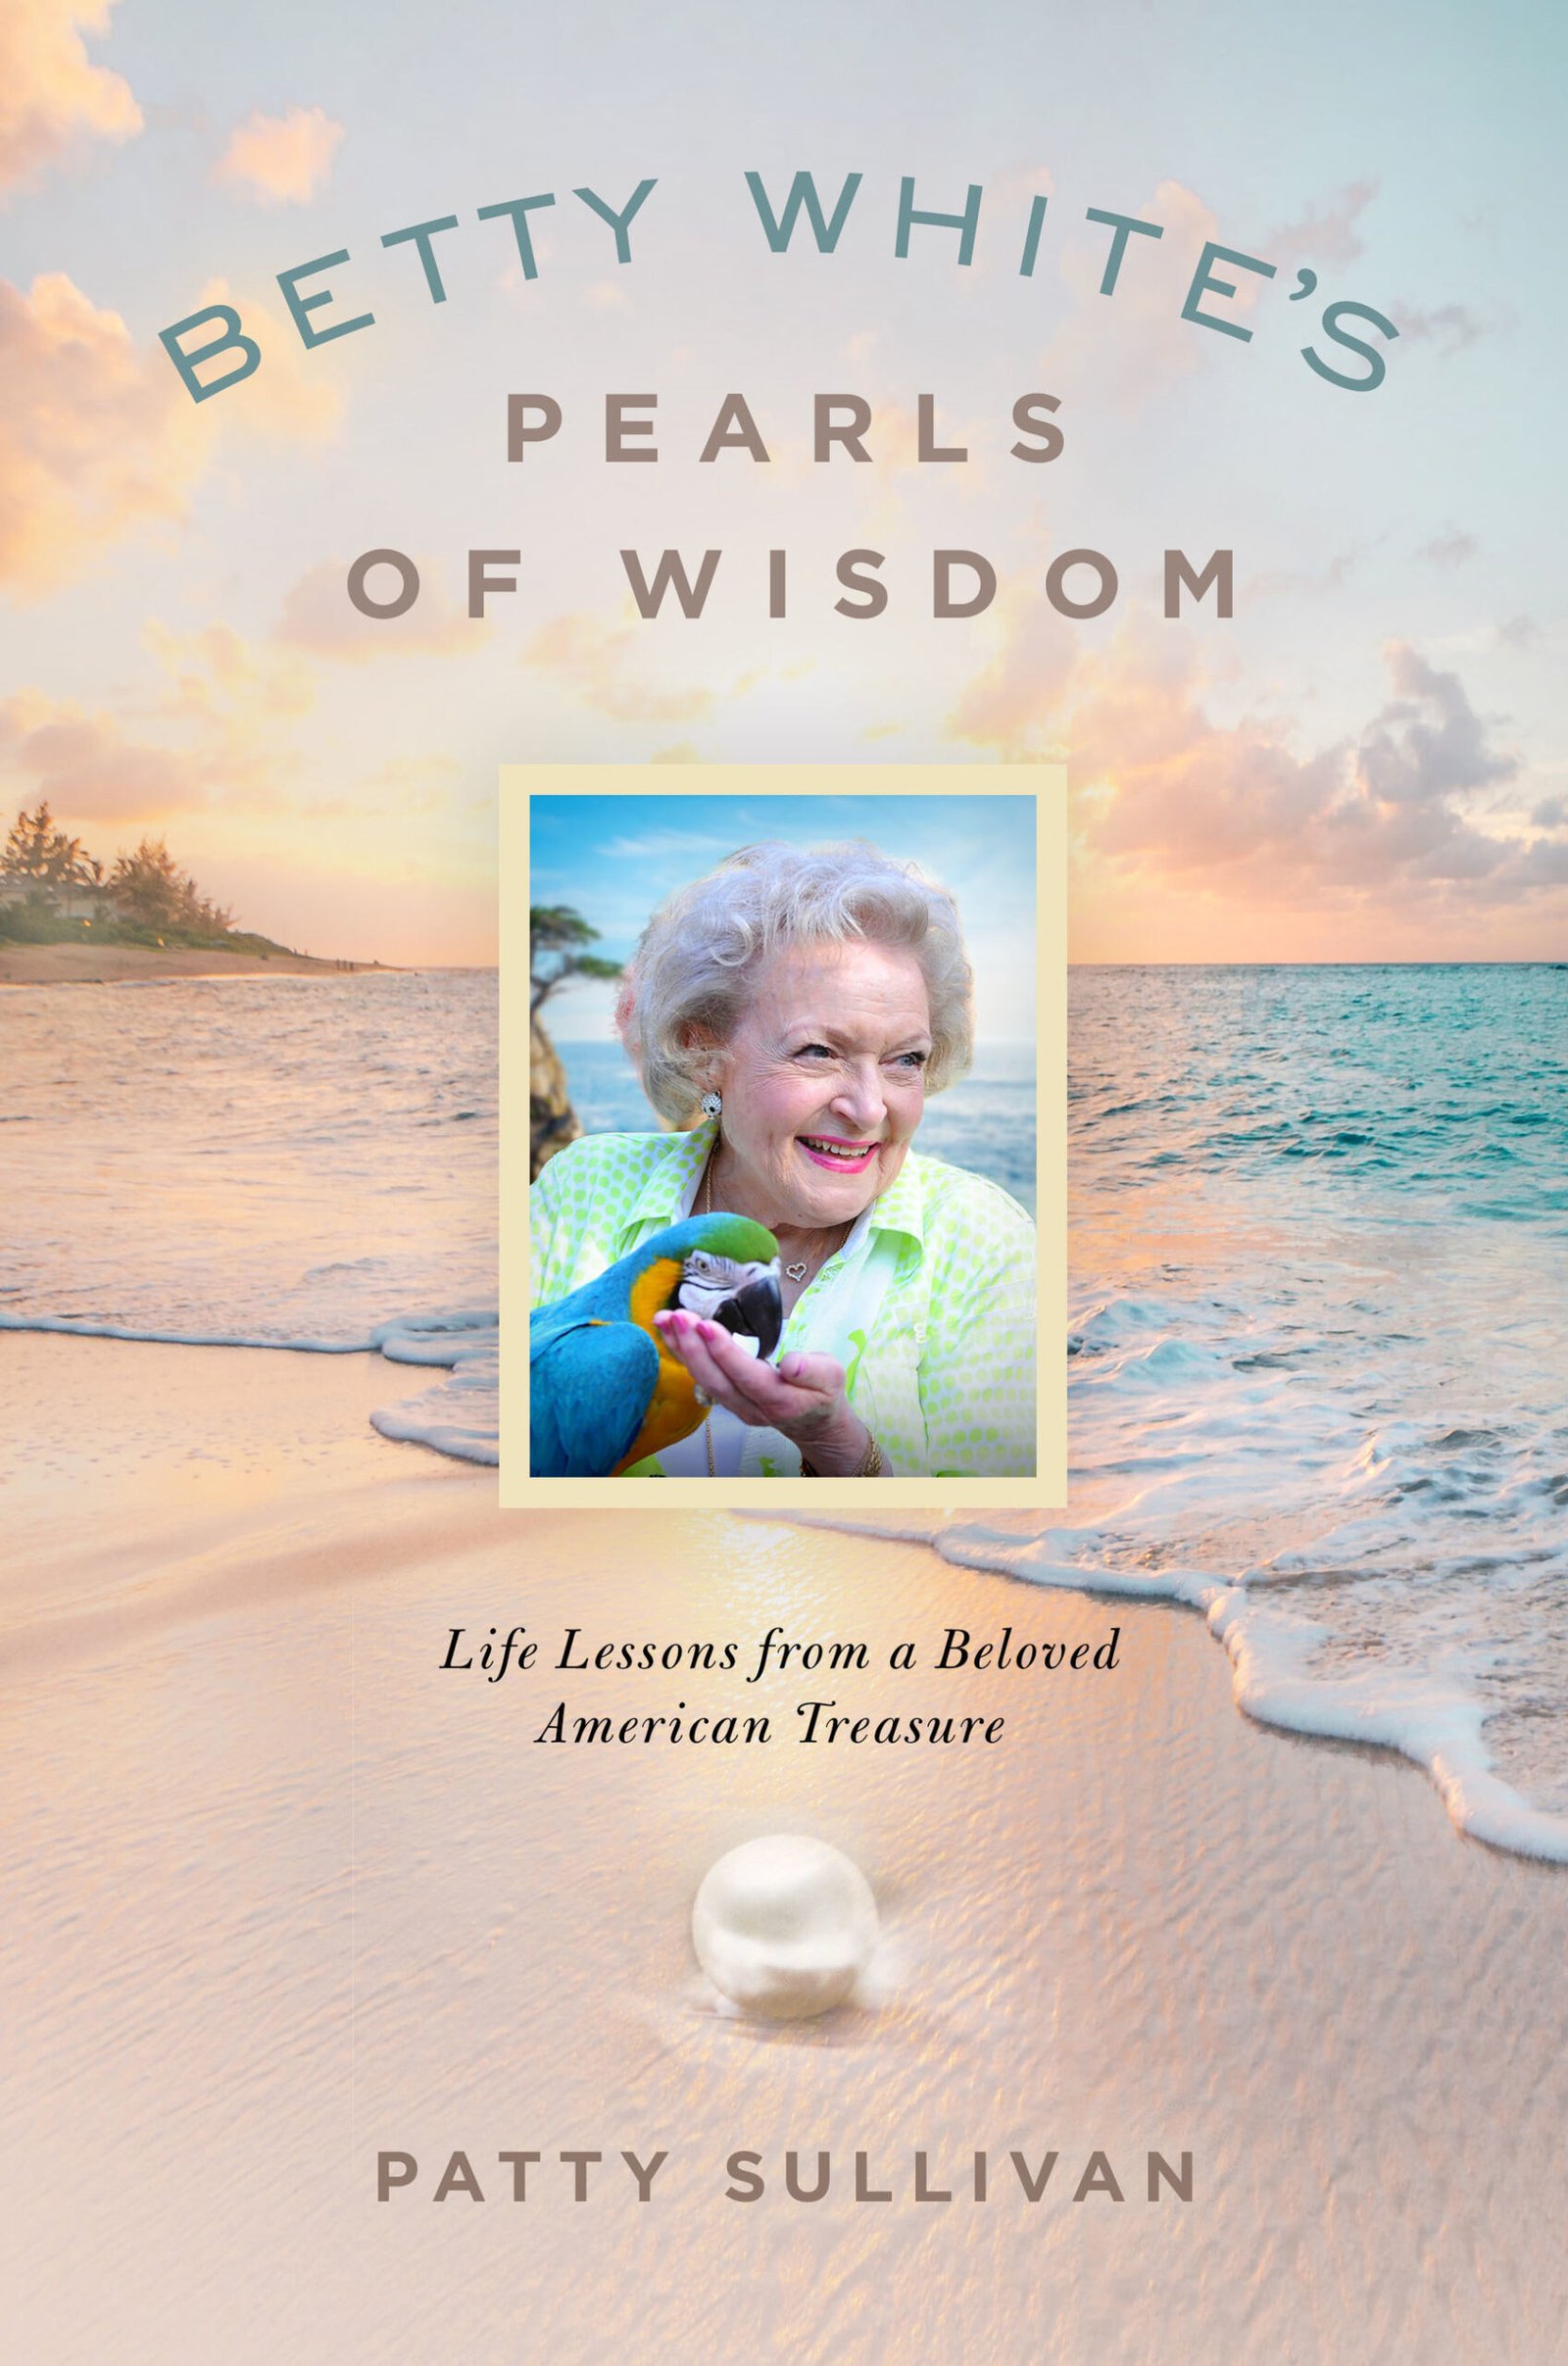 Betty White’s Pearls of Wisdom Book Available Dec. 13th